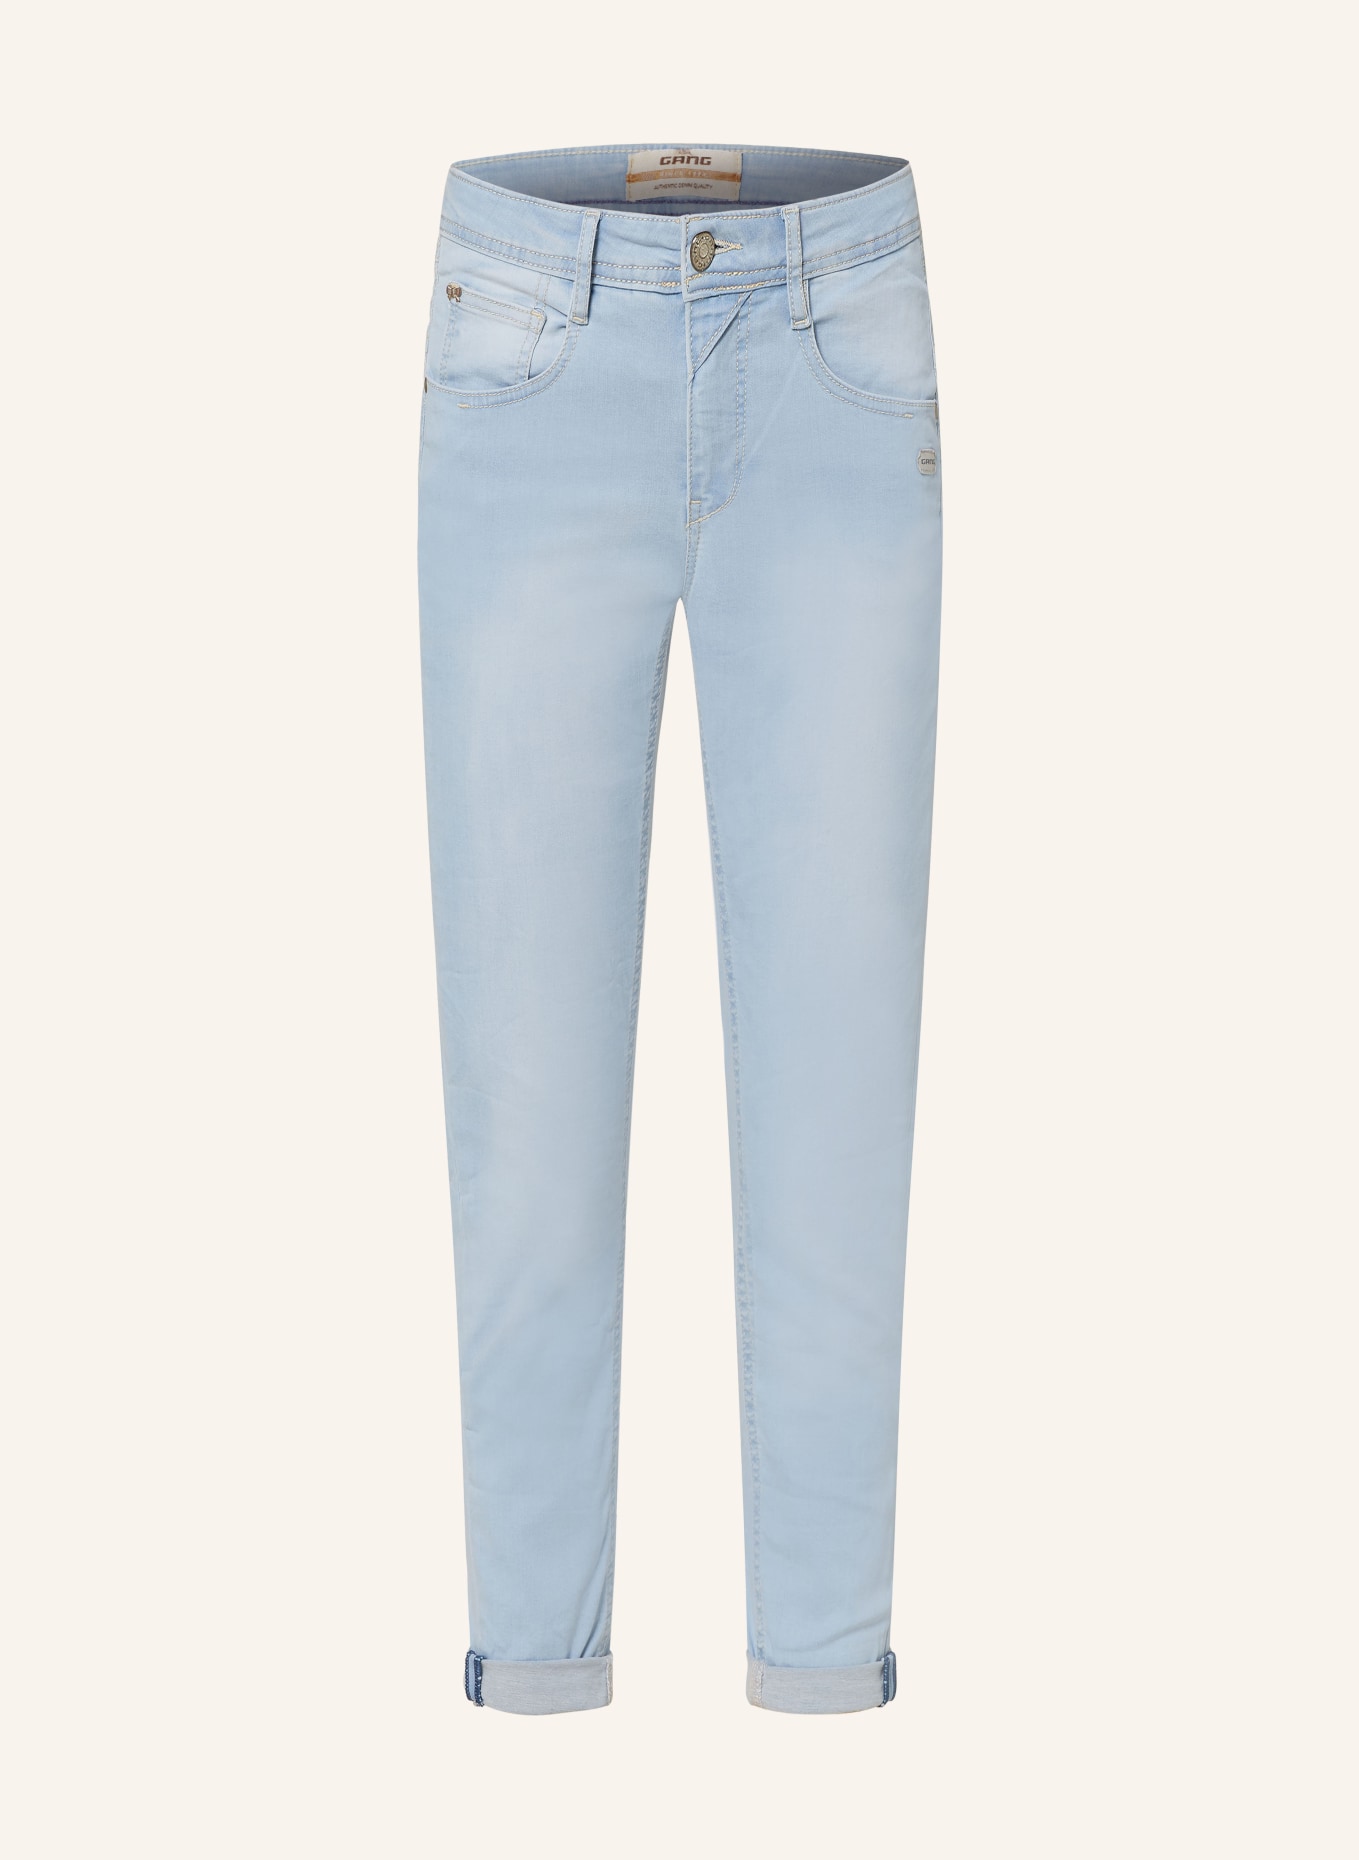 GANG 7/8-Jeans AMELIE, Farbe: 7656 glamour mid (Bild 1)